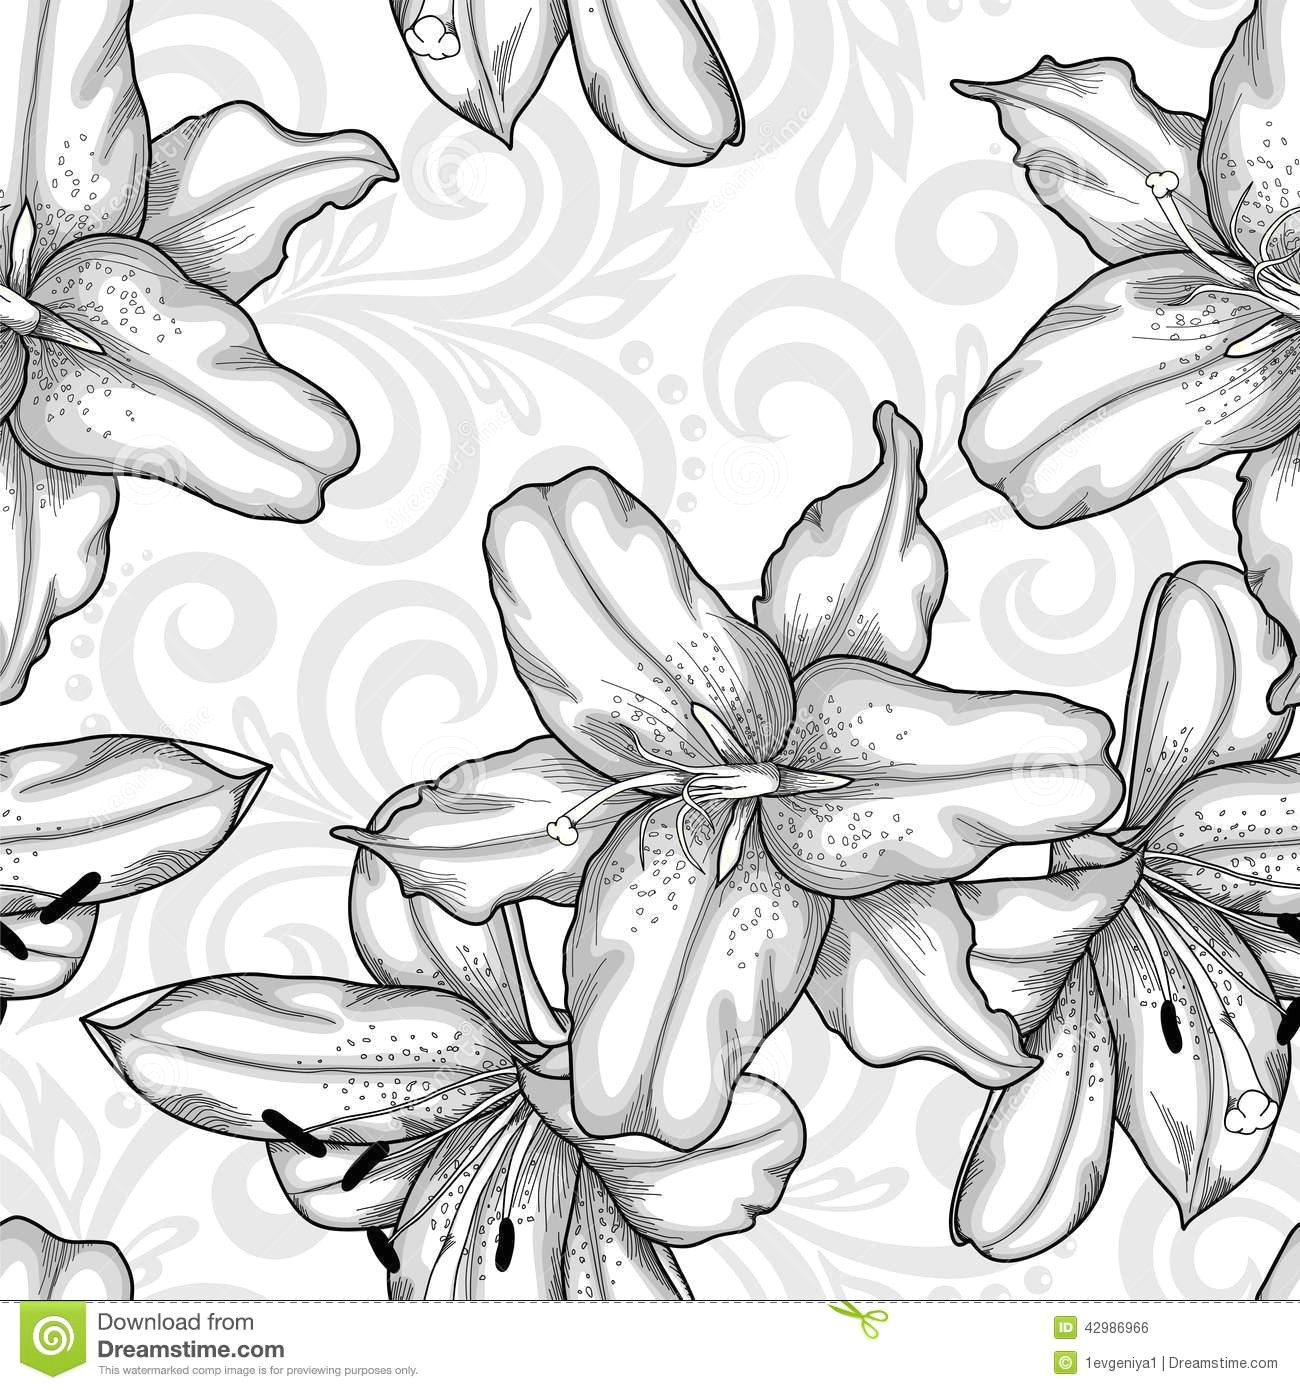 Drawings Of Flowers Abstract Black and White Seamless Pattern with Blue Lilies Flowers and